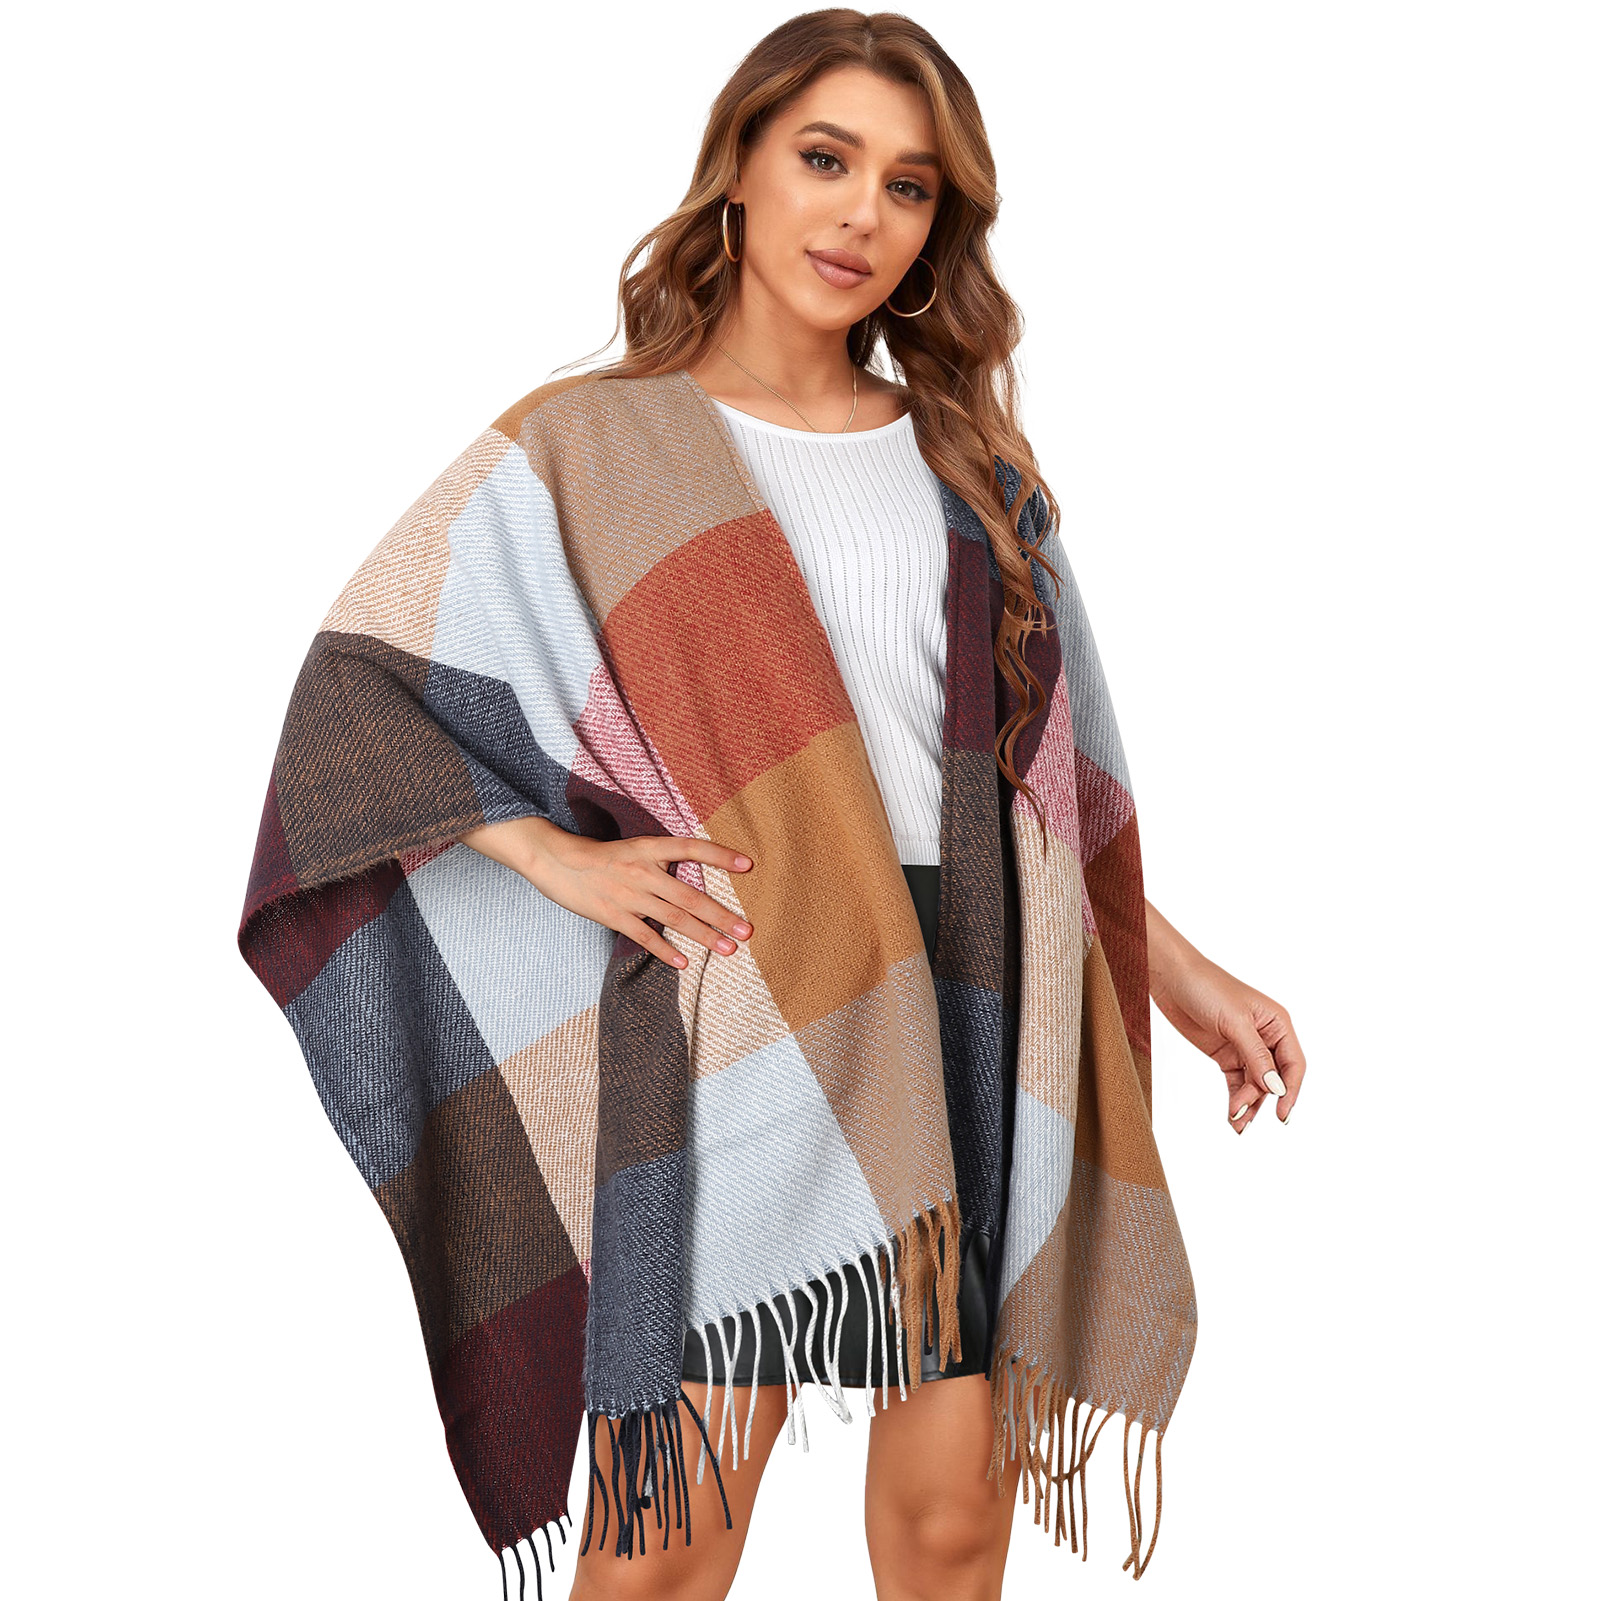 Topshe Women's Plaid Sweater Poncho Oversize Cape Coat Open Front ...